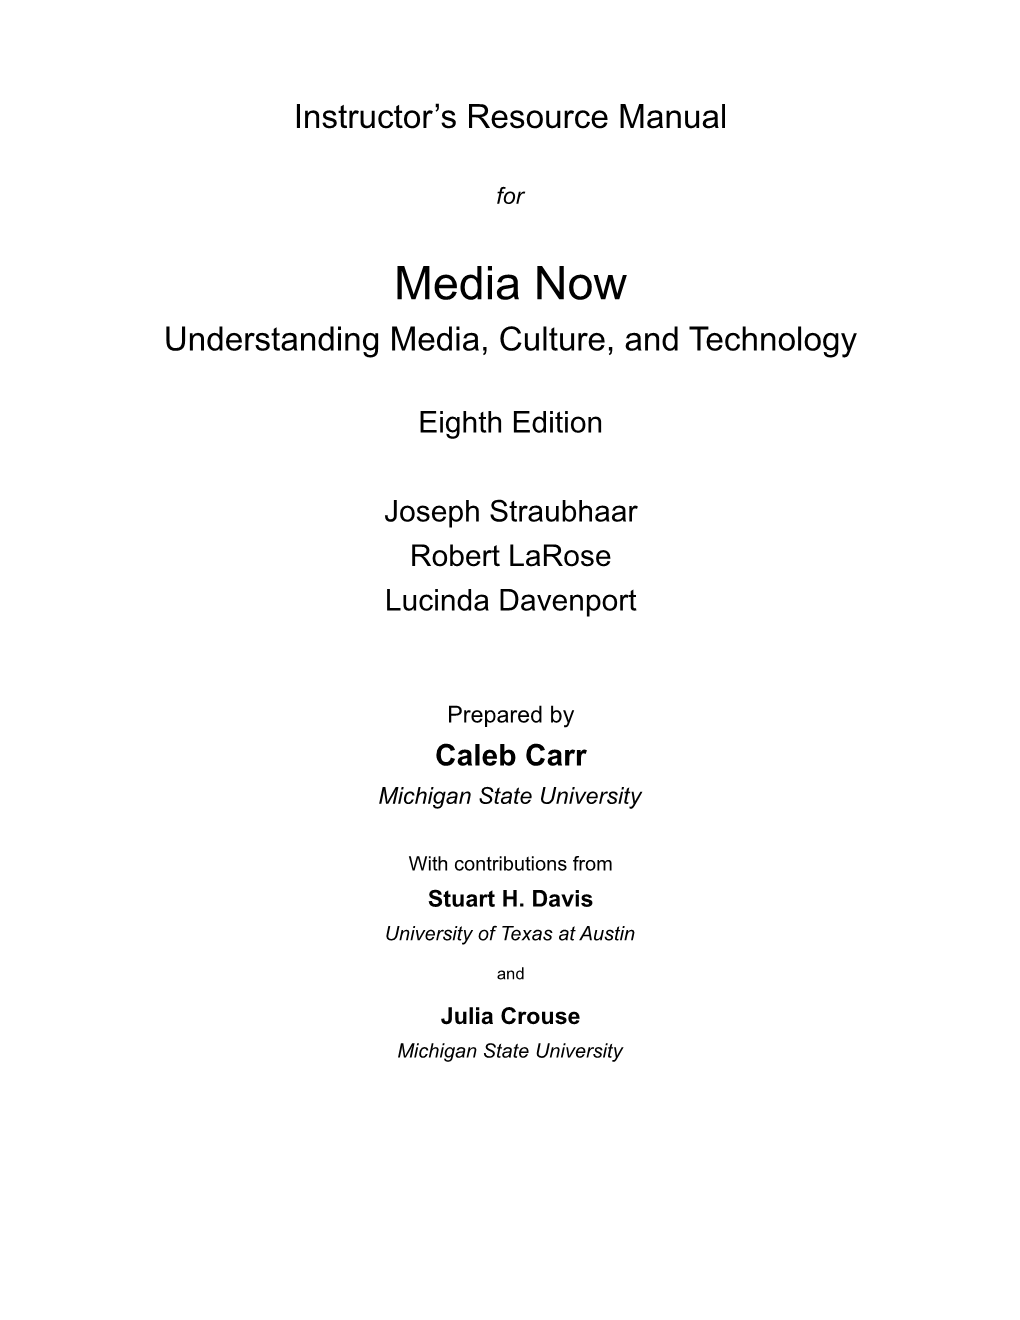 Understanding Media, Culture, and Technology